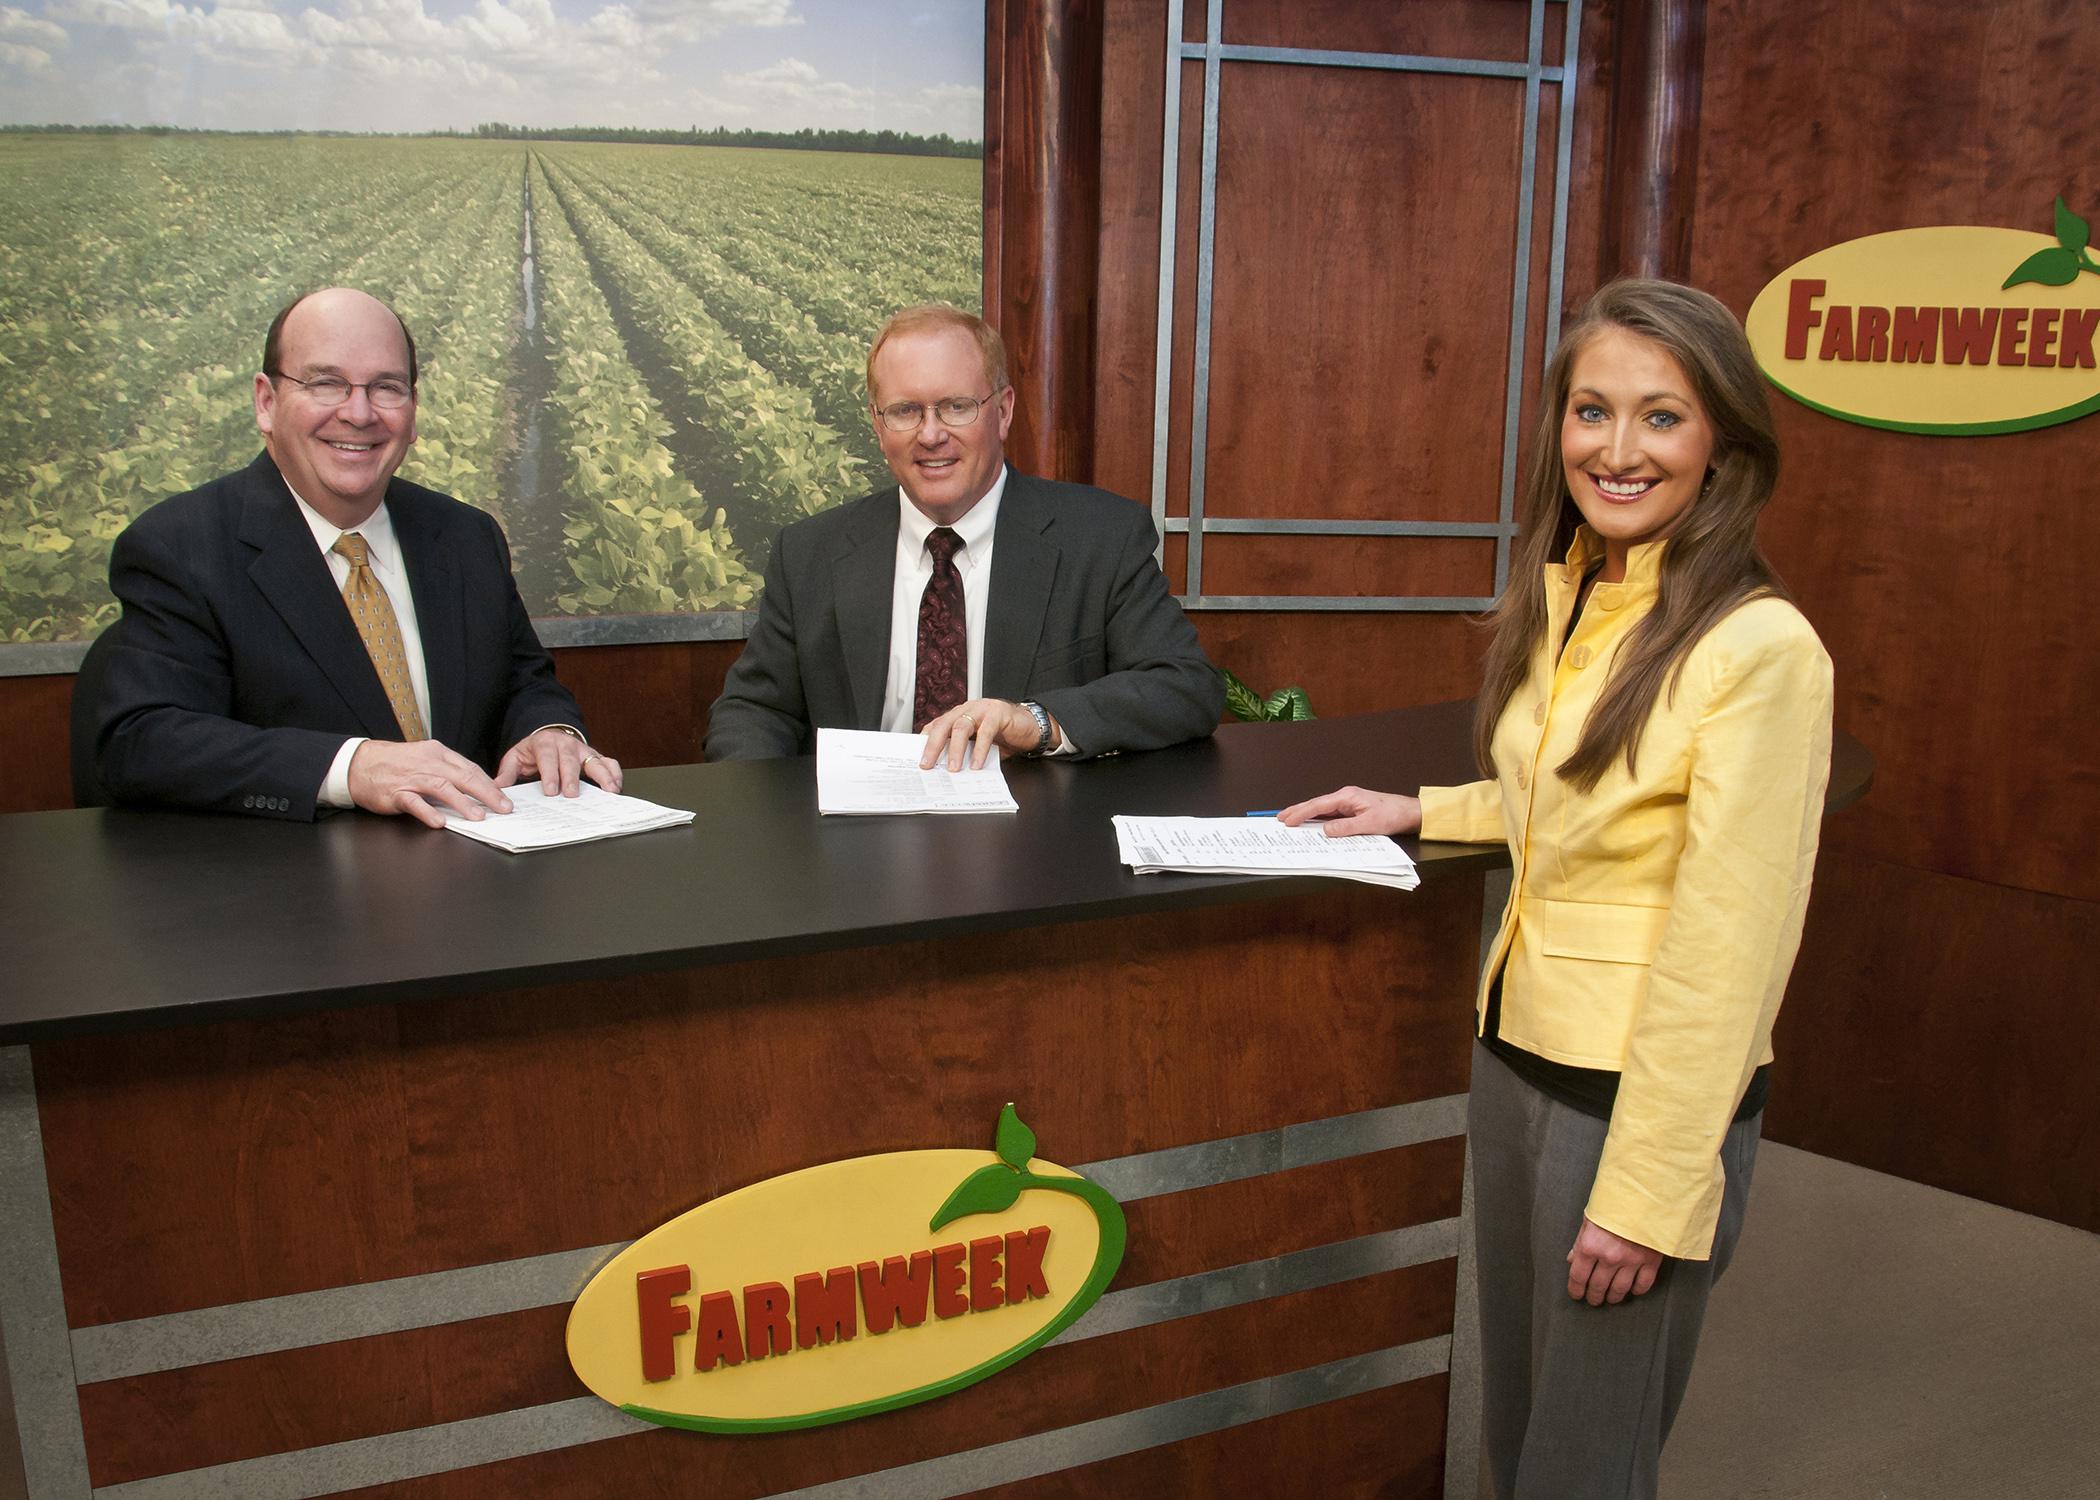 Farmweek, the state's oldest and locally produced agricultural television news show, has moved to Saturdays at 6 p.m. and Mondays at 6 a.m. on Mississippi Public Broadcasting. From left, Leighton Spann, Artis Ford and Amy Taylor launched the show's 37th season this month. (Photo by MSU Ag Communications/Scott Corey)